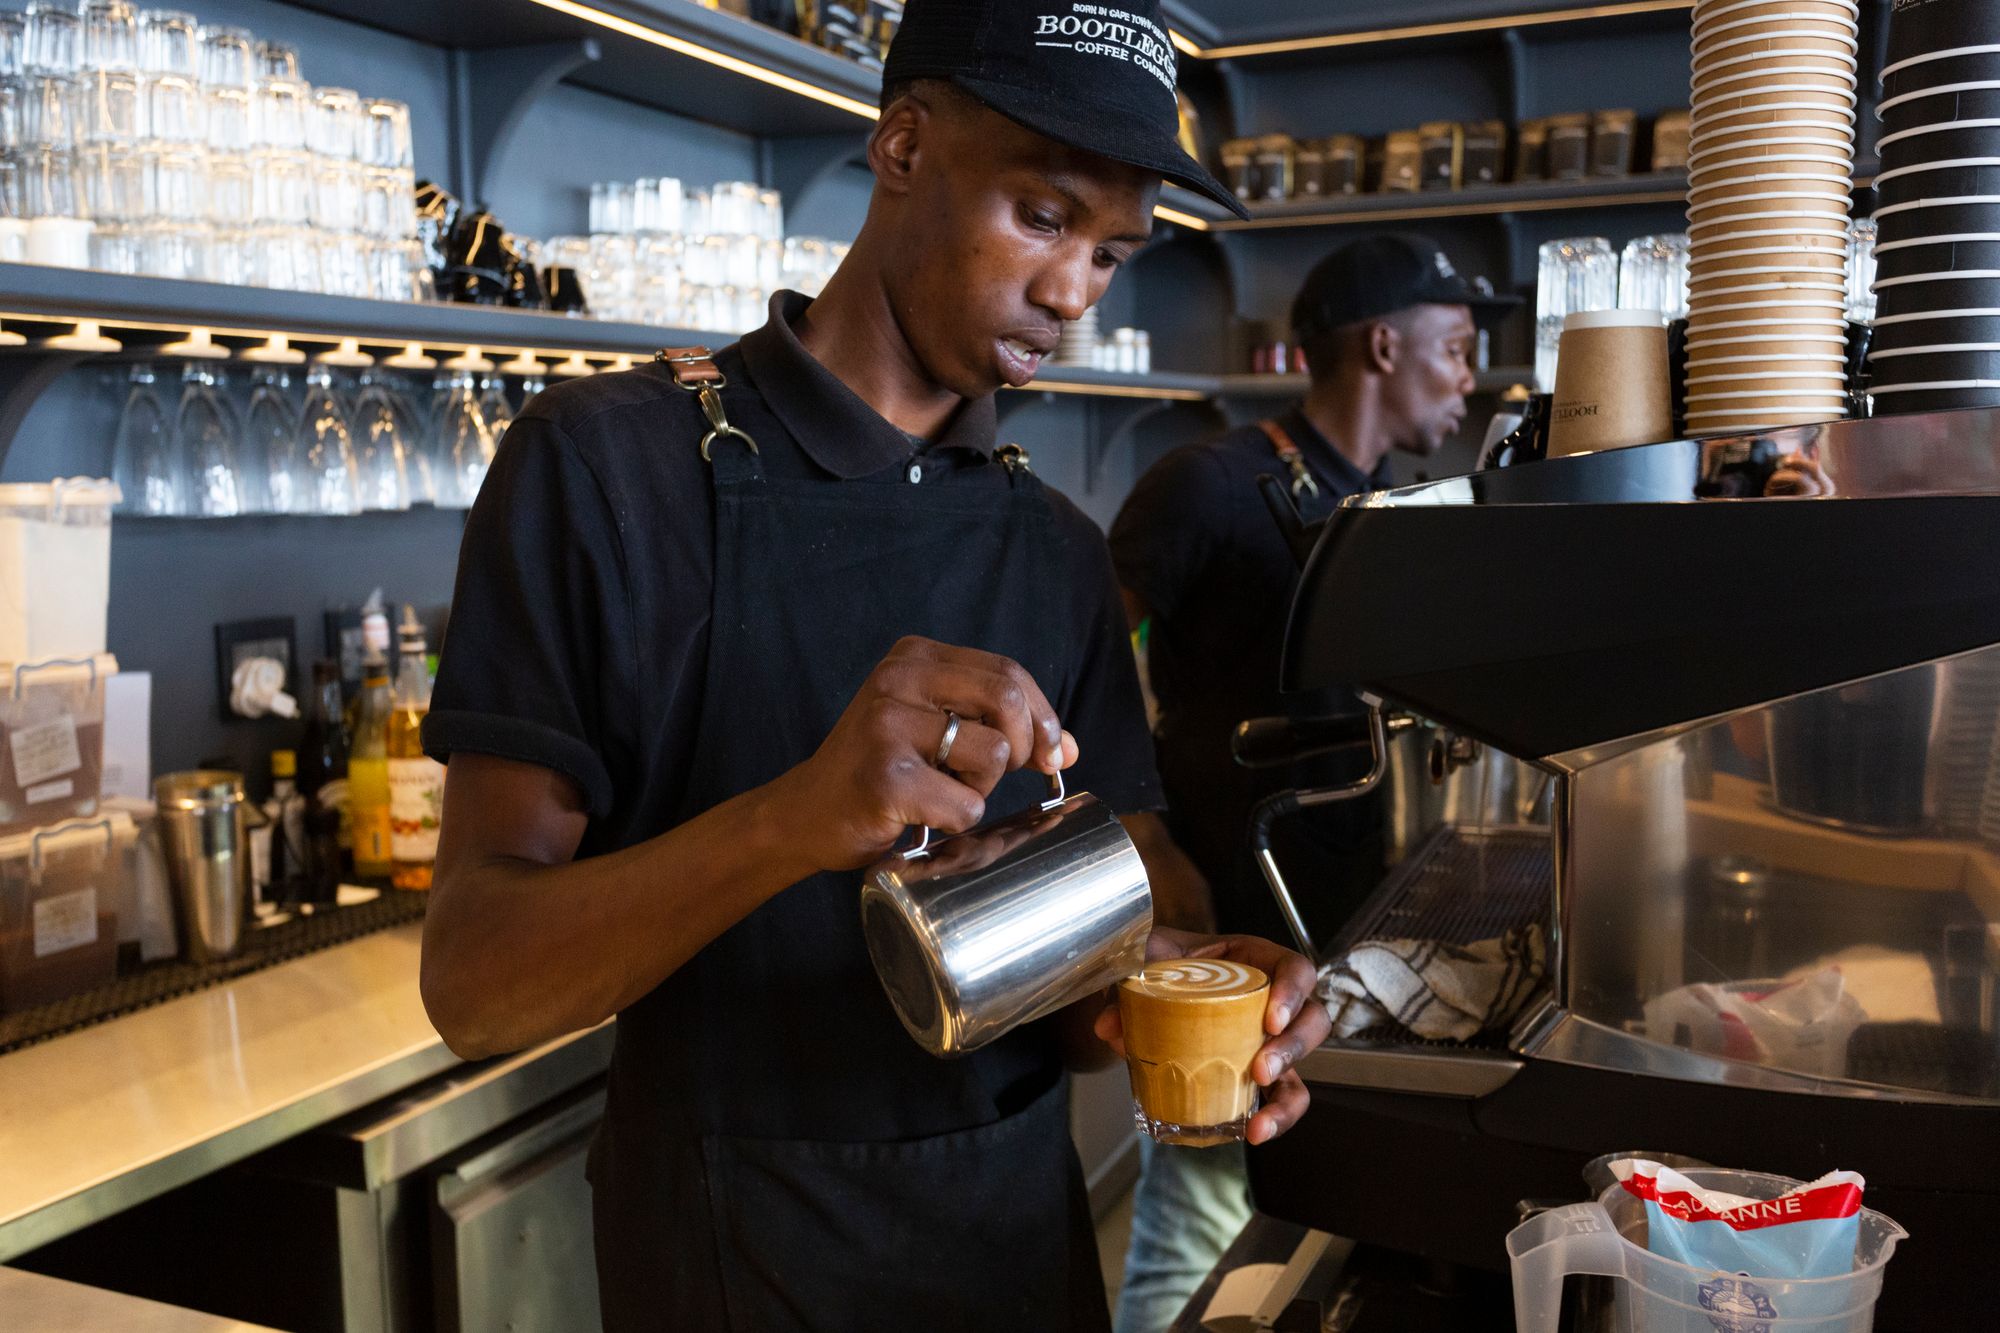 Bootlegger Barista Self-Manages Upskilling in Cape Town